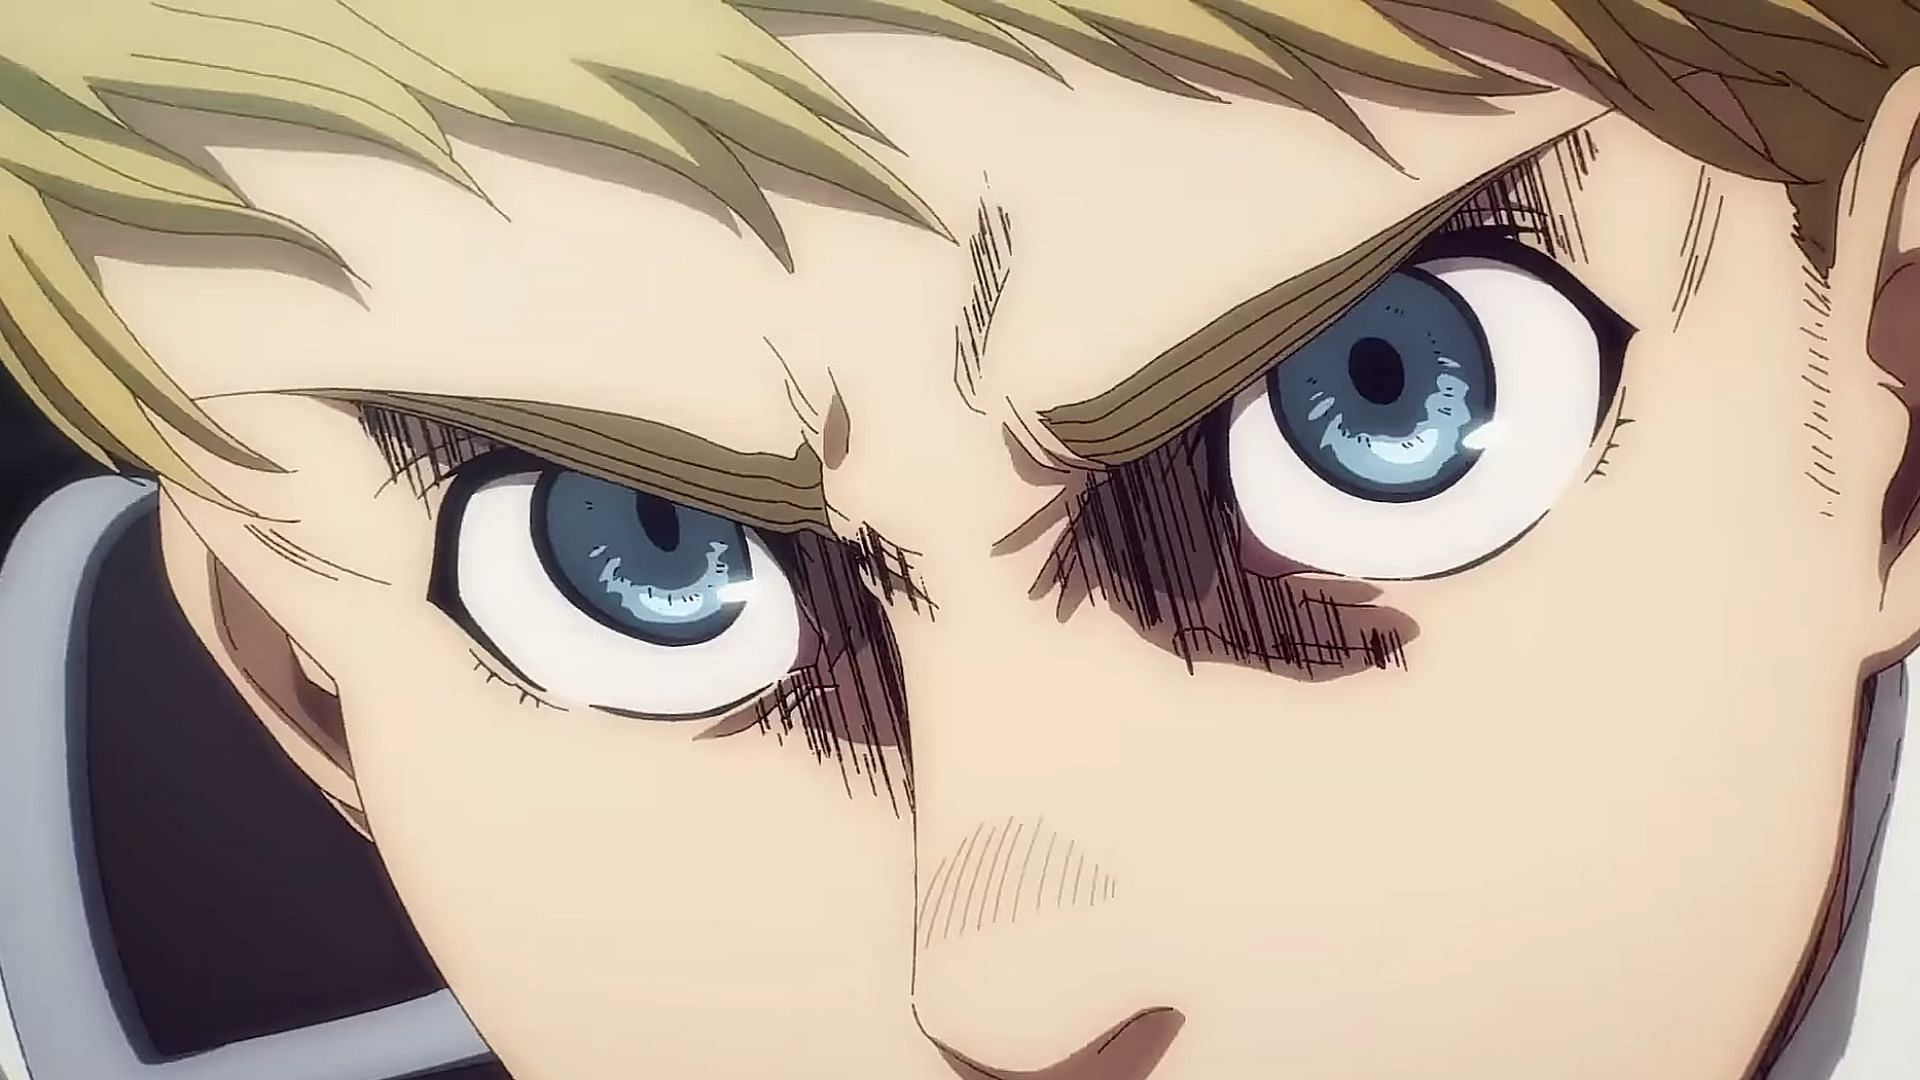 Armin as seen in the main trailer of the anime (Image via MAPPA)